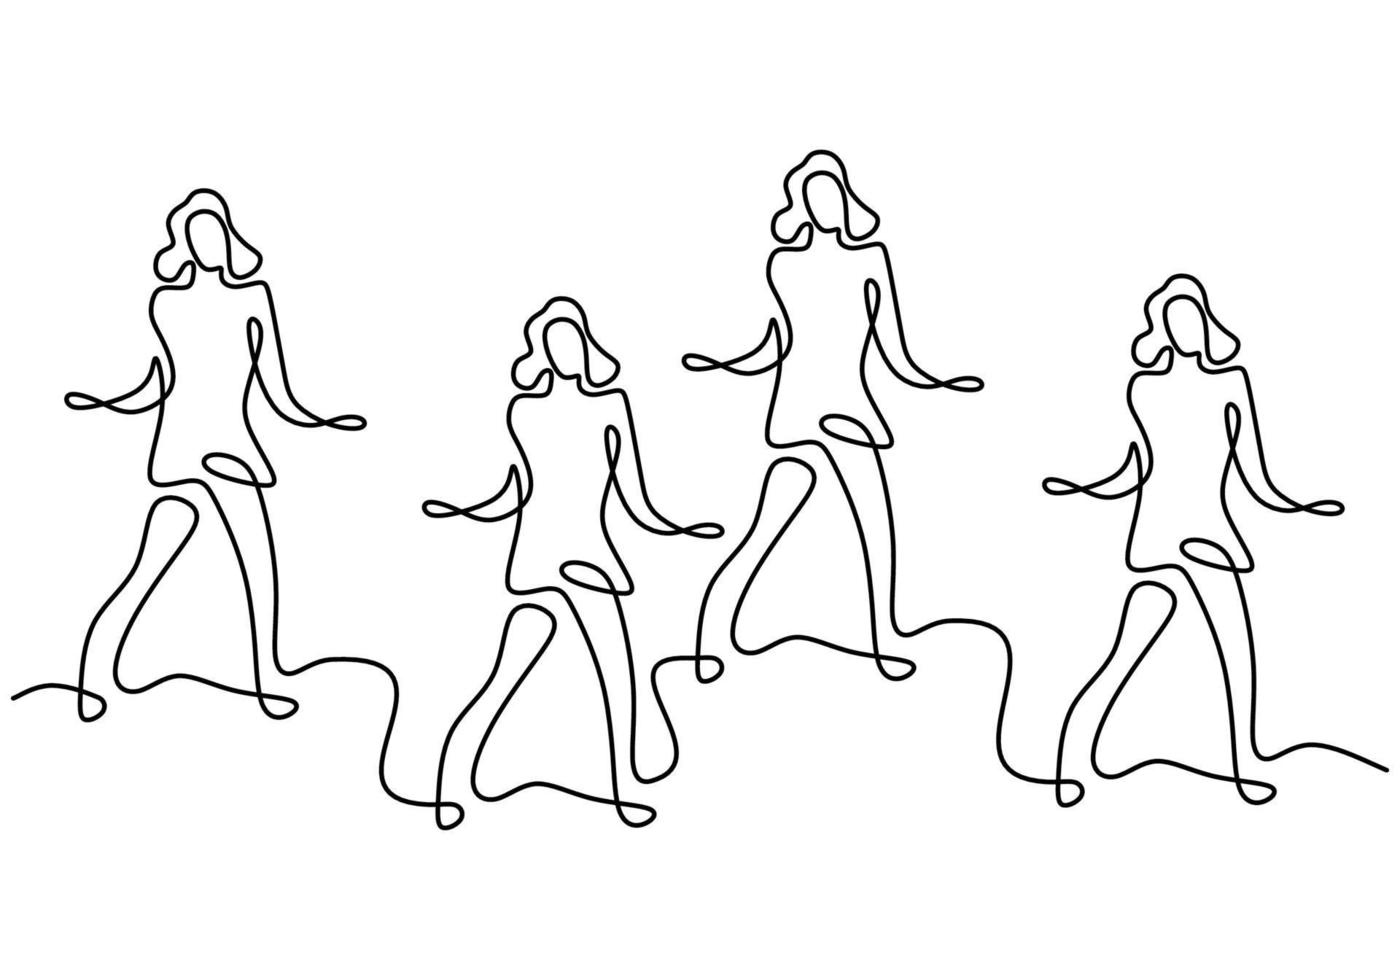 Continuous line drawing of group of girls in zumba dance. Four energetic young womens practice dance isolated on white background. Dance sport and healthy lifestyle concept. Vector illustration